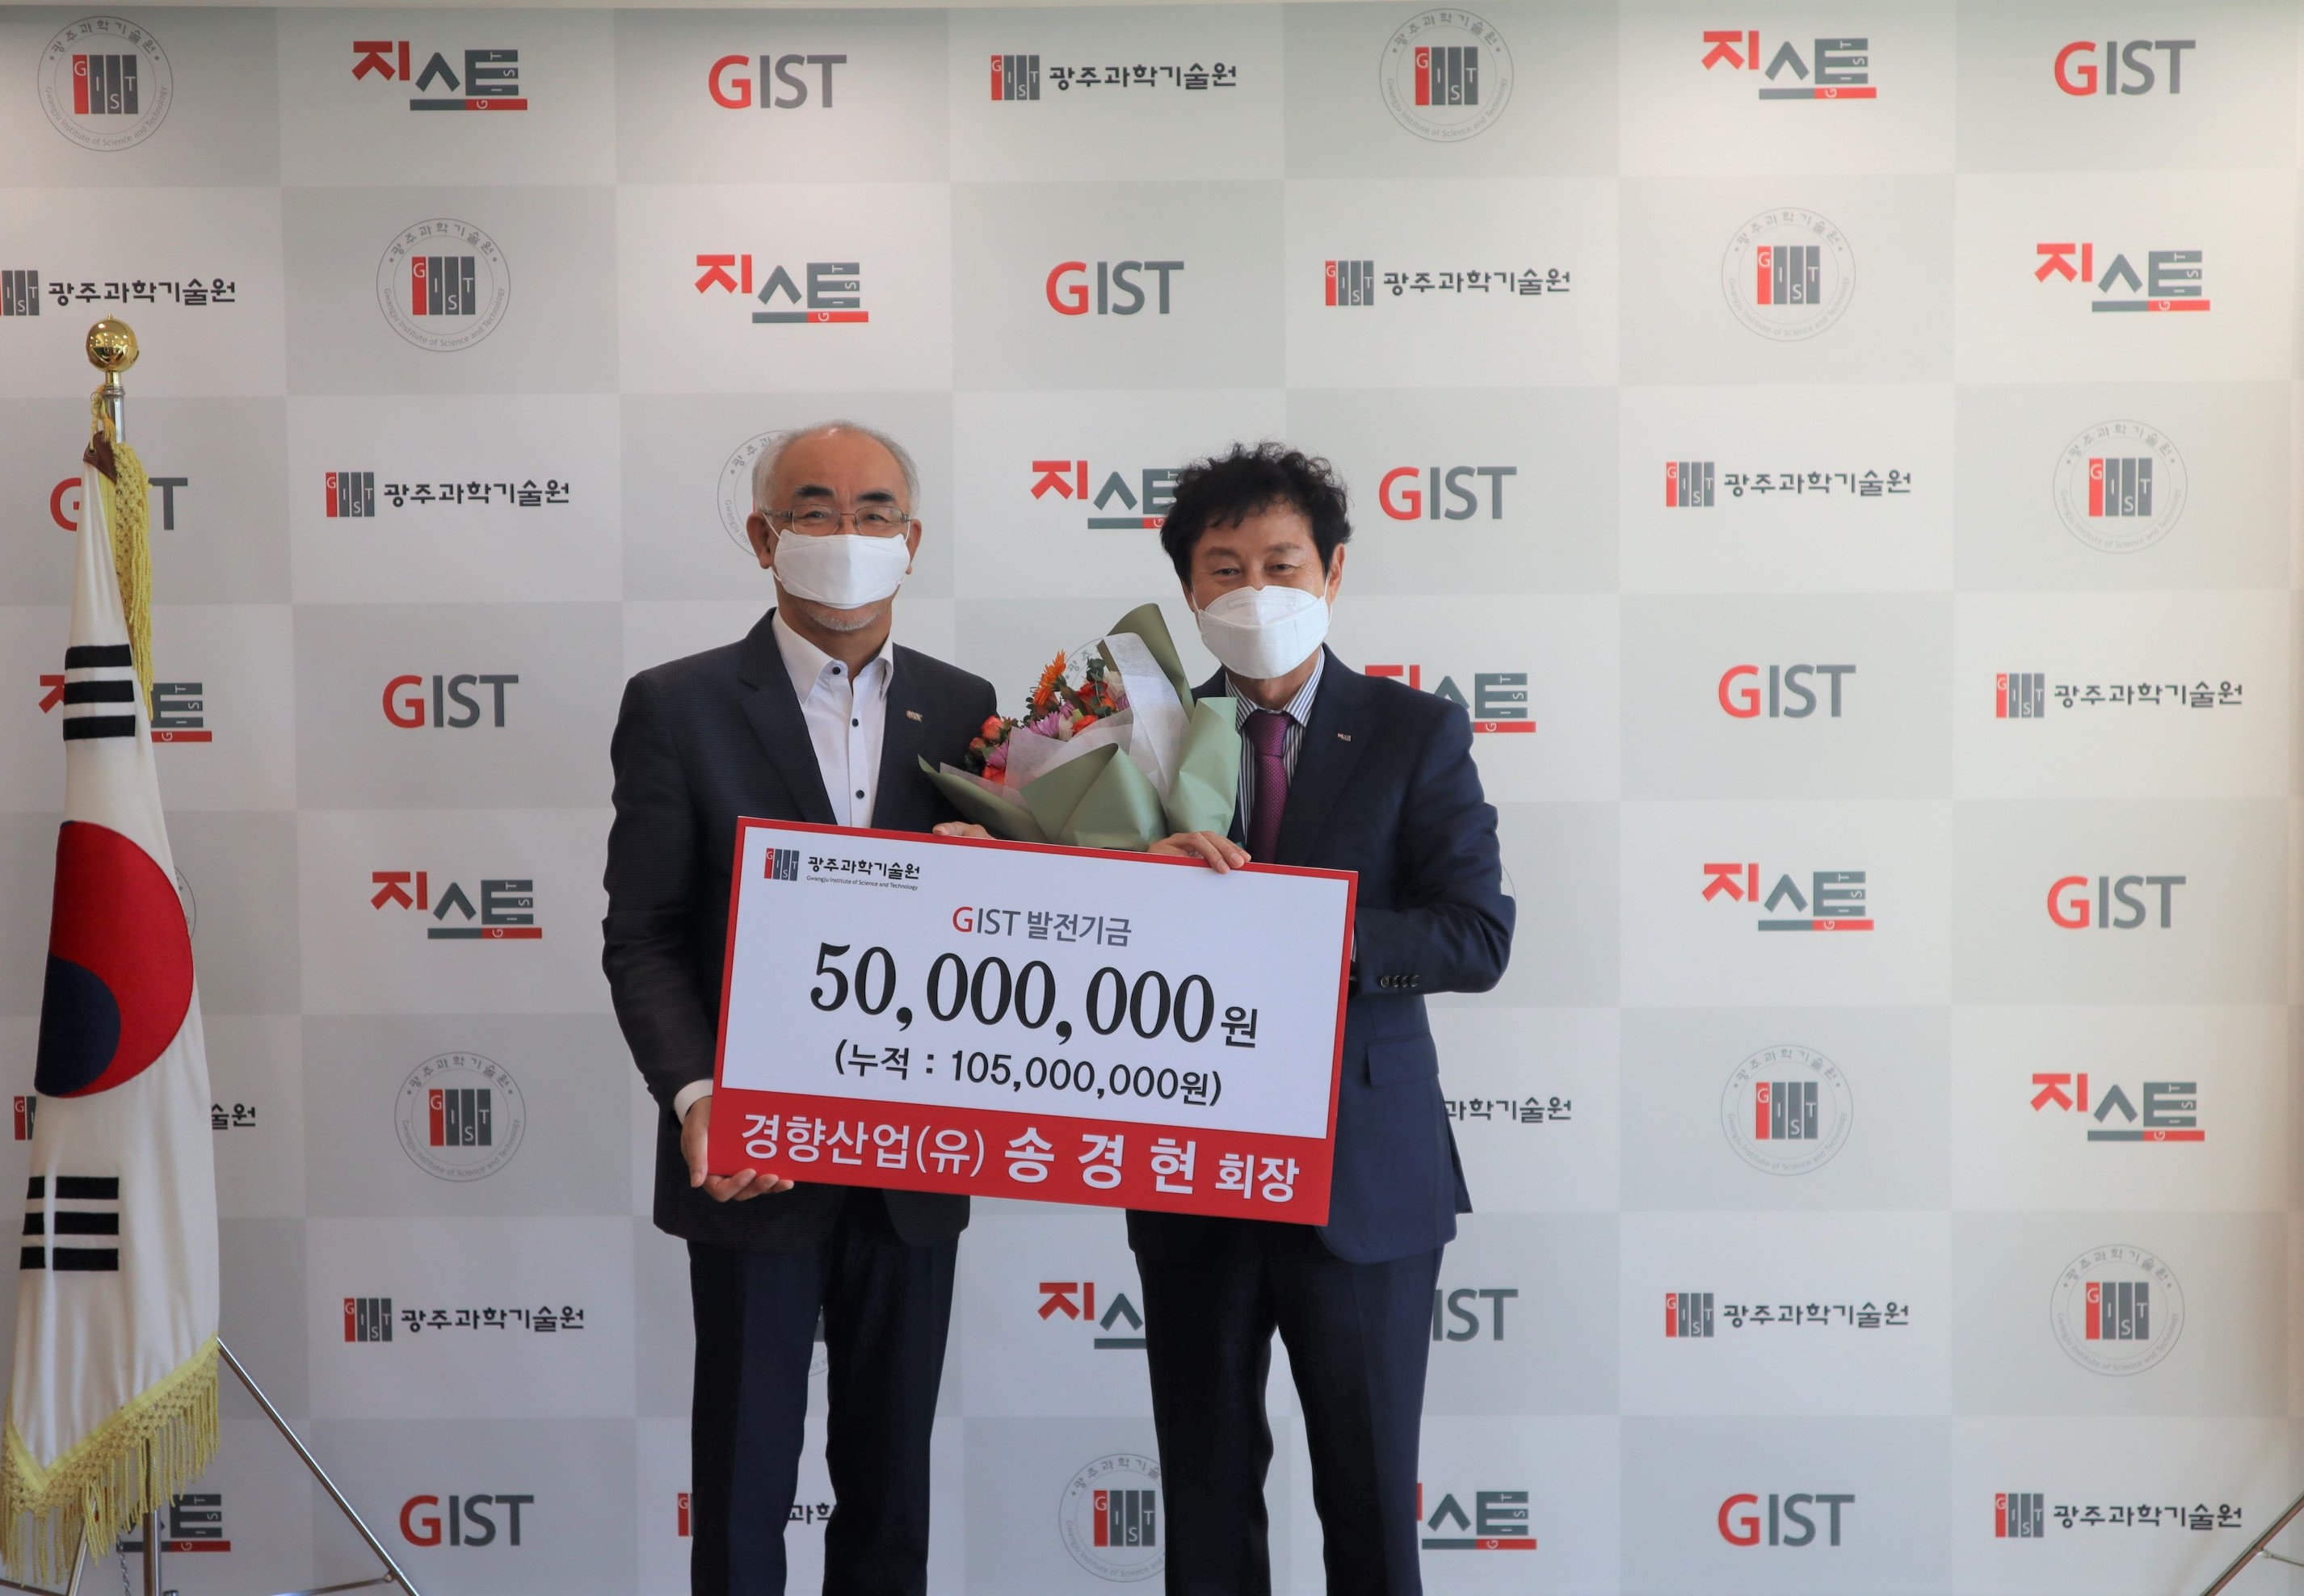 Chairman Kyung-hyun Song of Kyunghyang Industrial Co., Ltd., donates an additional 50 million won to the GIST Development Fund 이미지